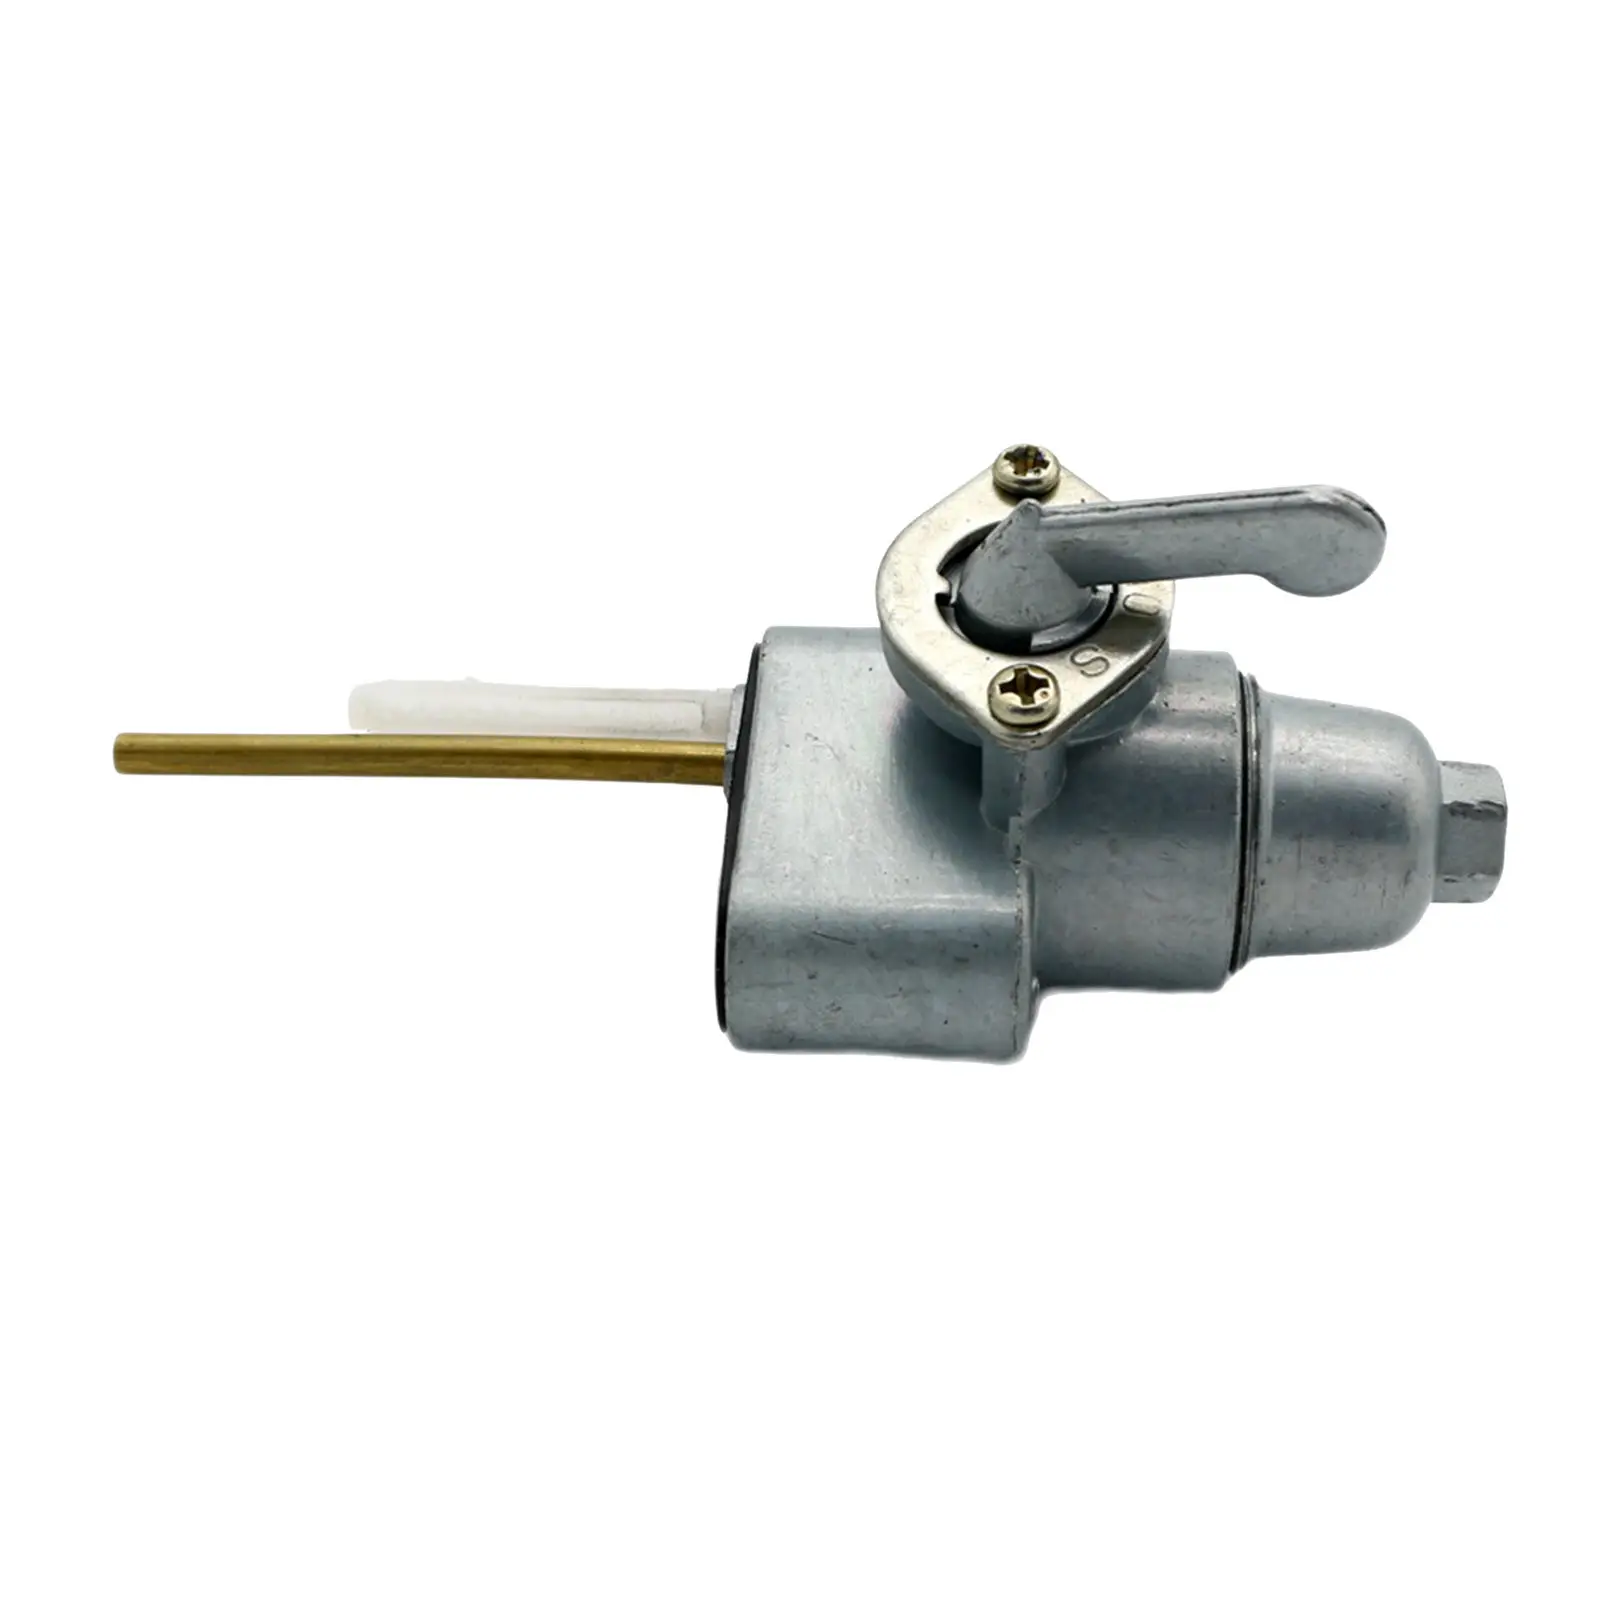 Fuel Petcock Compatible with Honda CB100 CB125 XL125 XL350 CL70 CL125 CB175 SL100 (180 Degree Outlet Fitting)